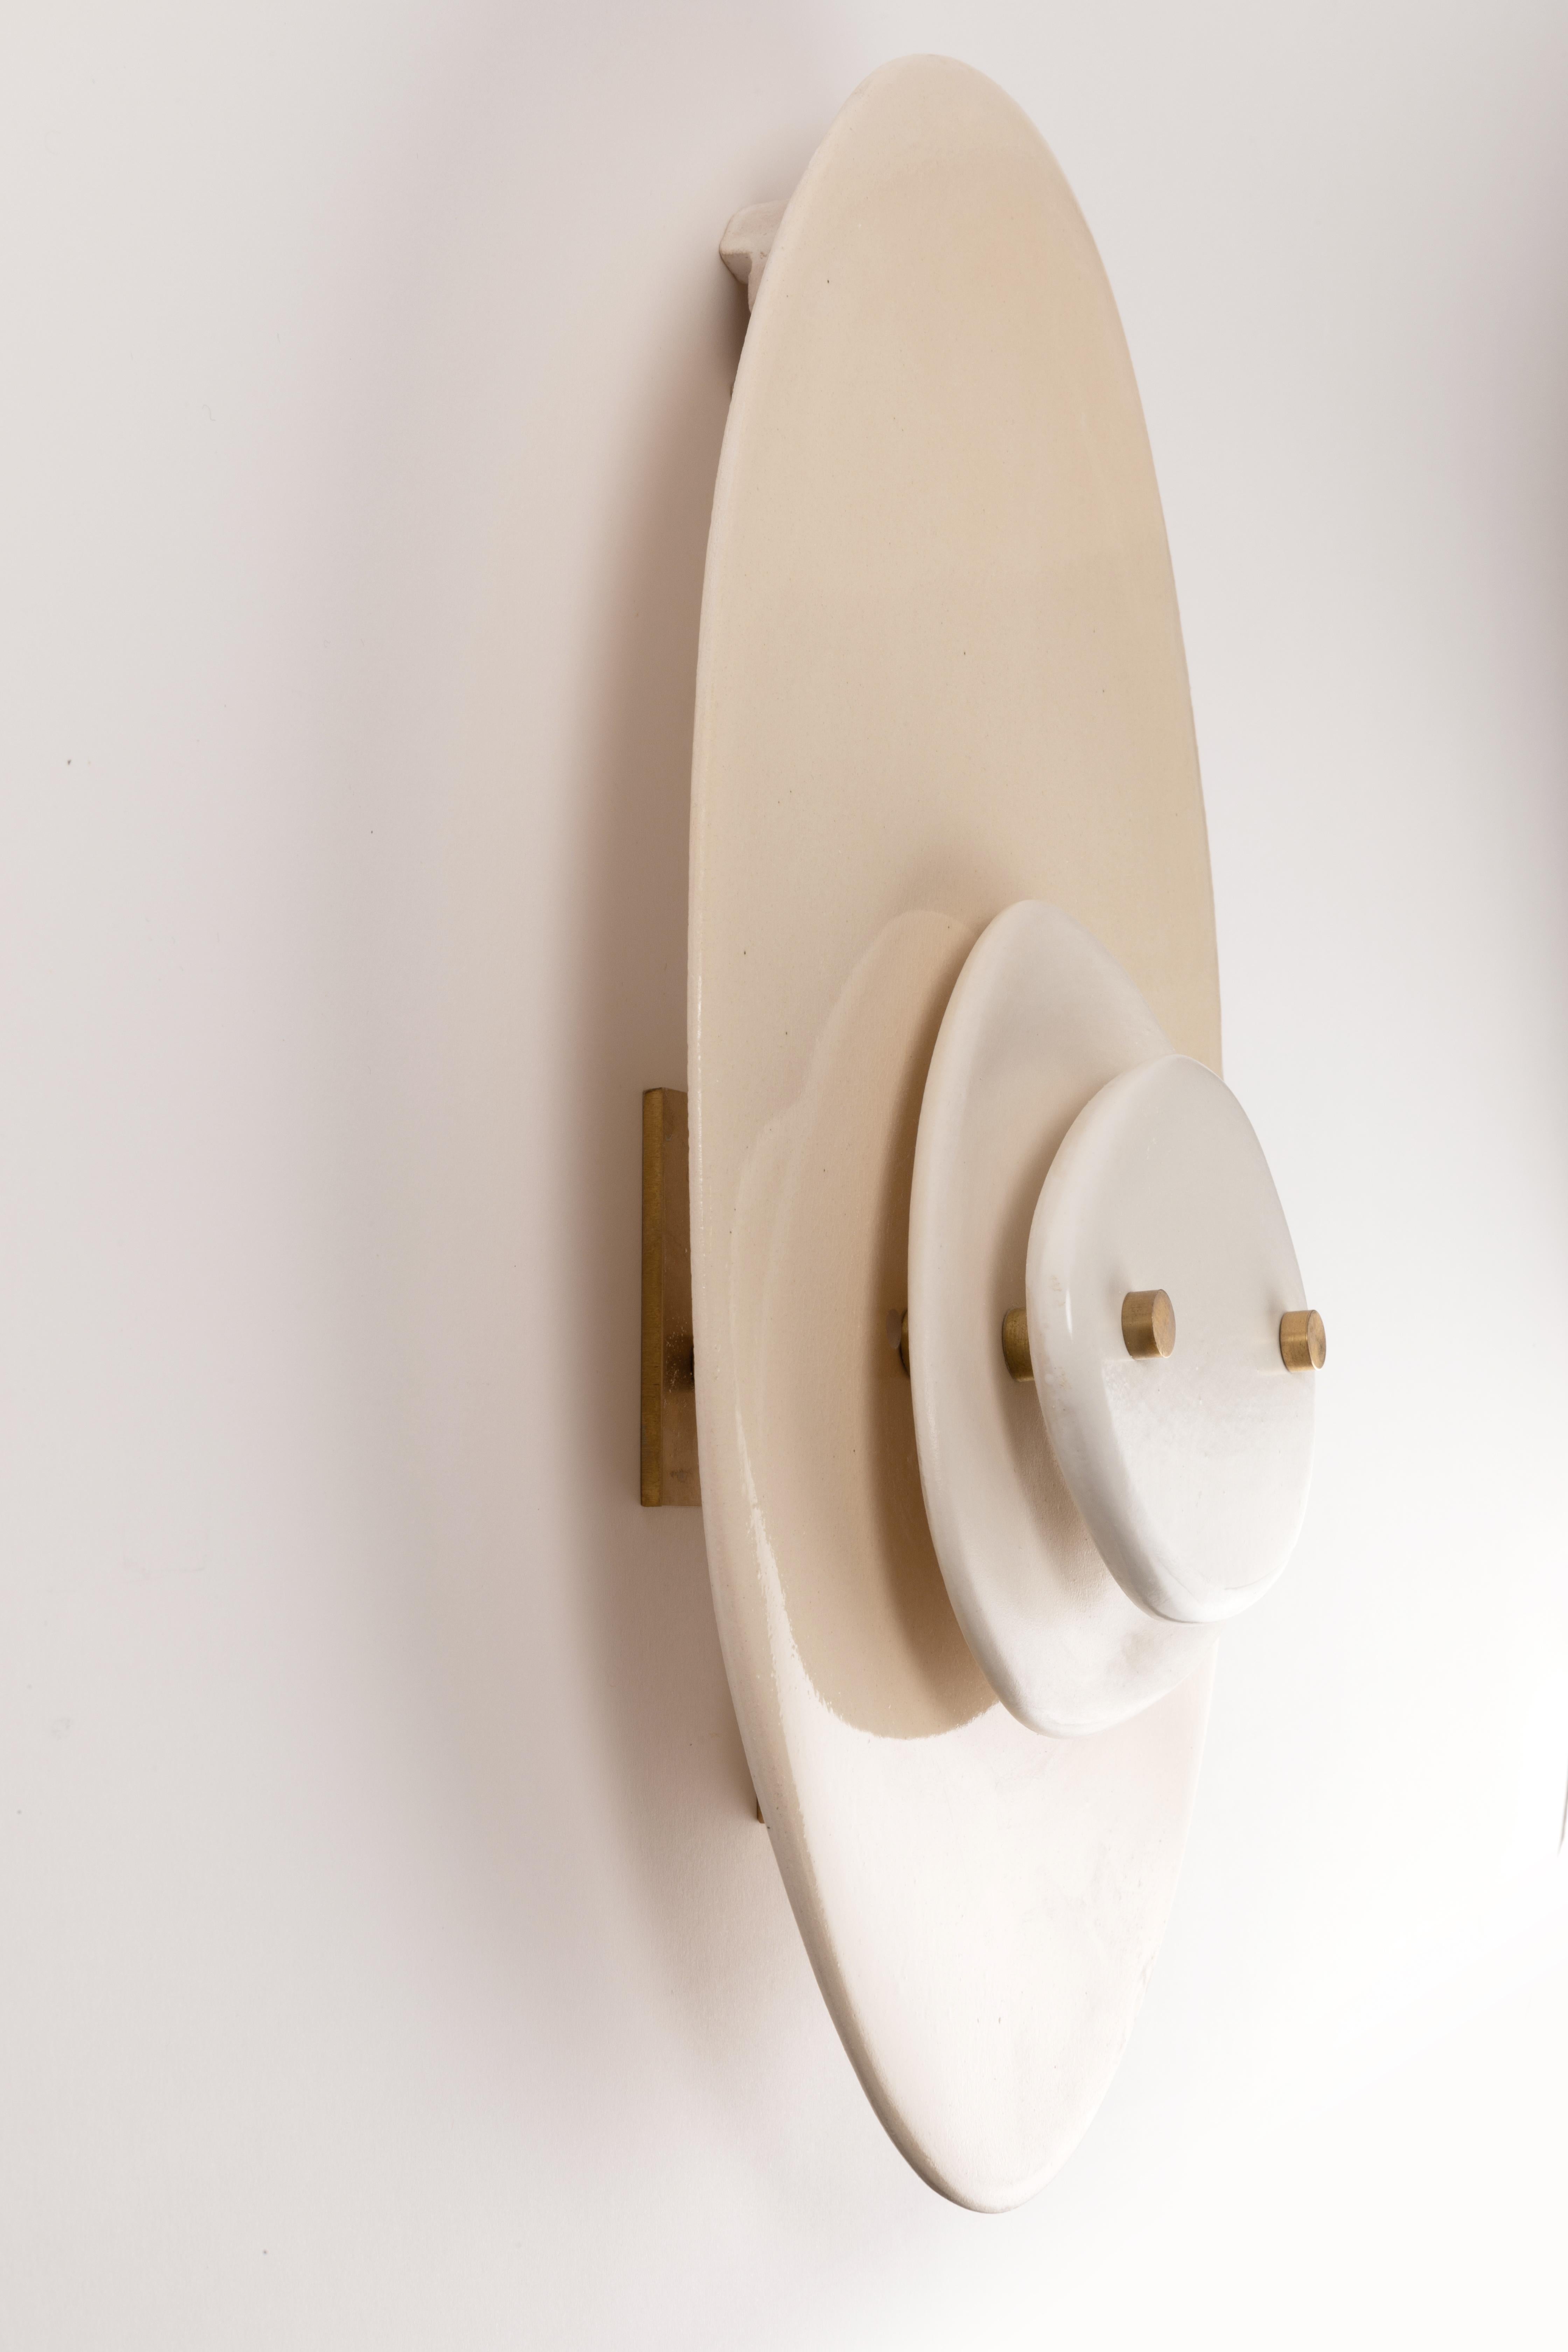 Contemporary Nerites Wall Sconce by Elsa Foulon